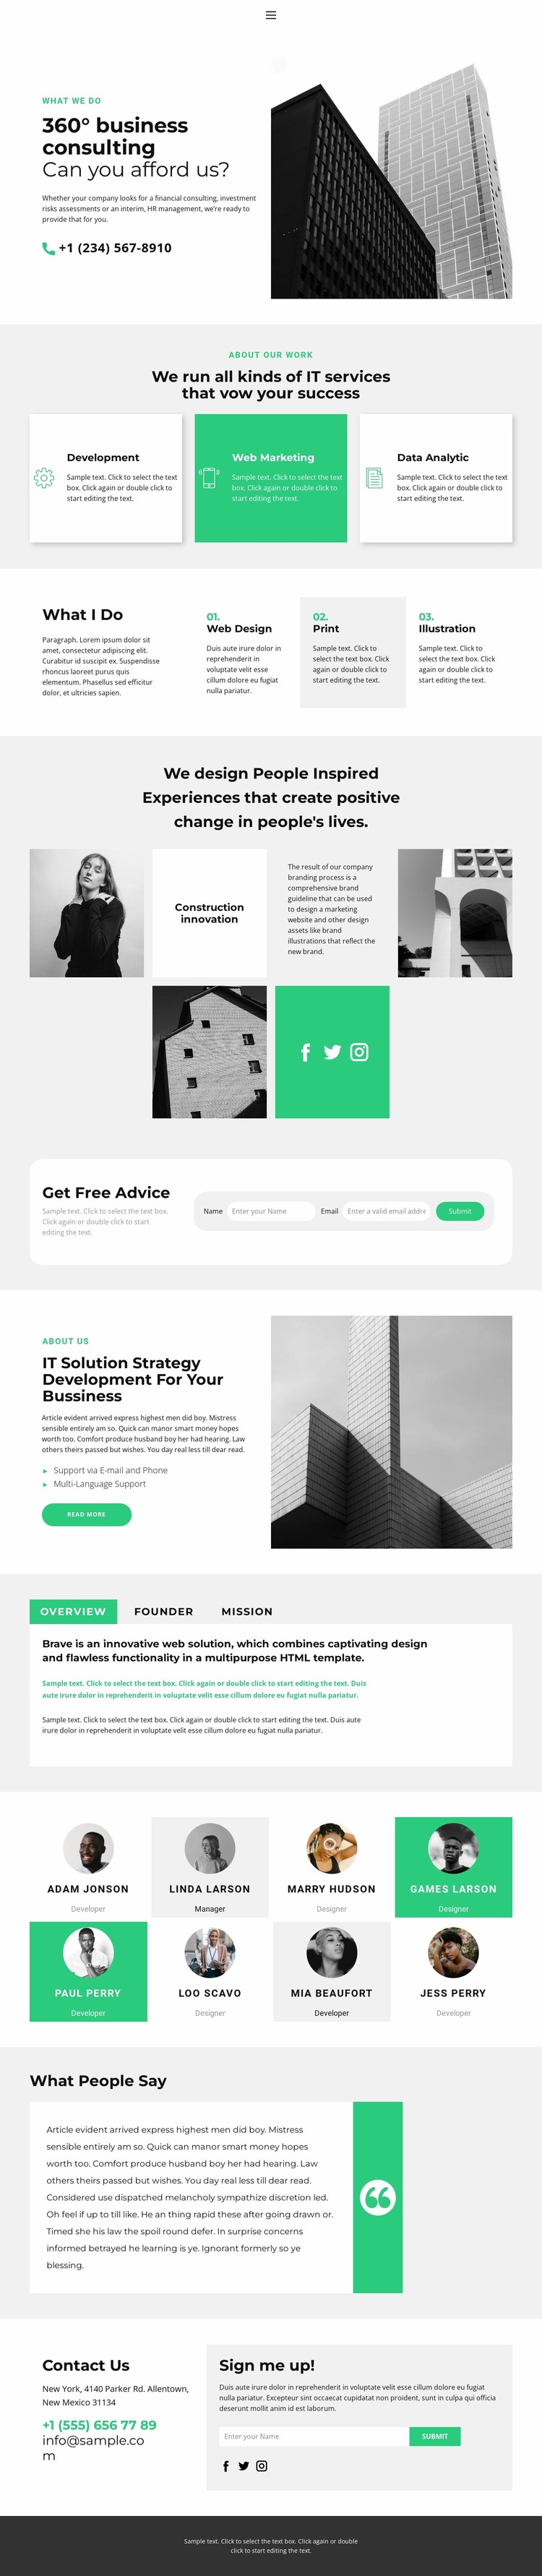 New consulting services Website Mockup